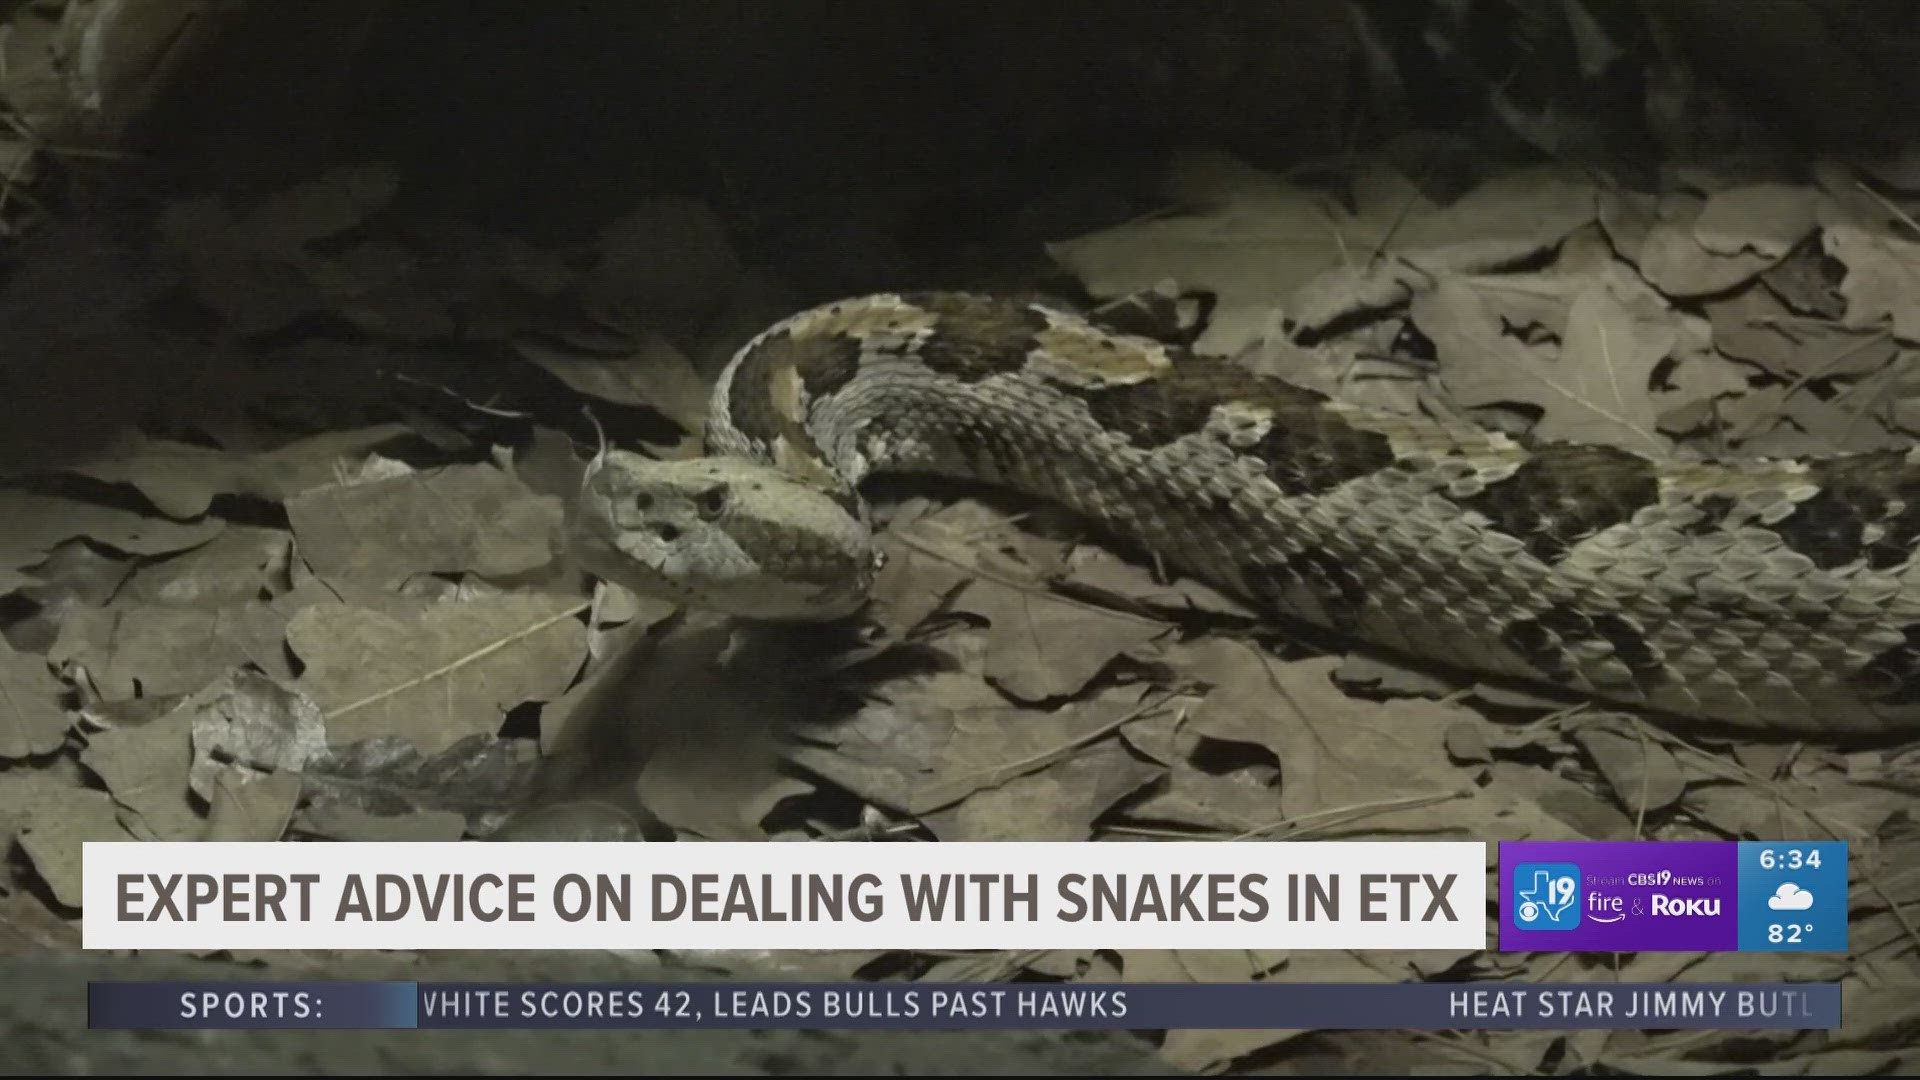 Experts give advice ahead of snake season in East Texas